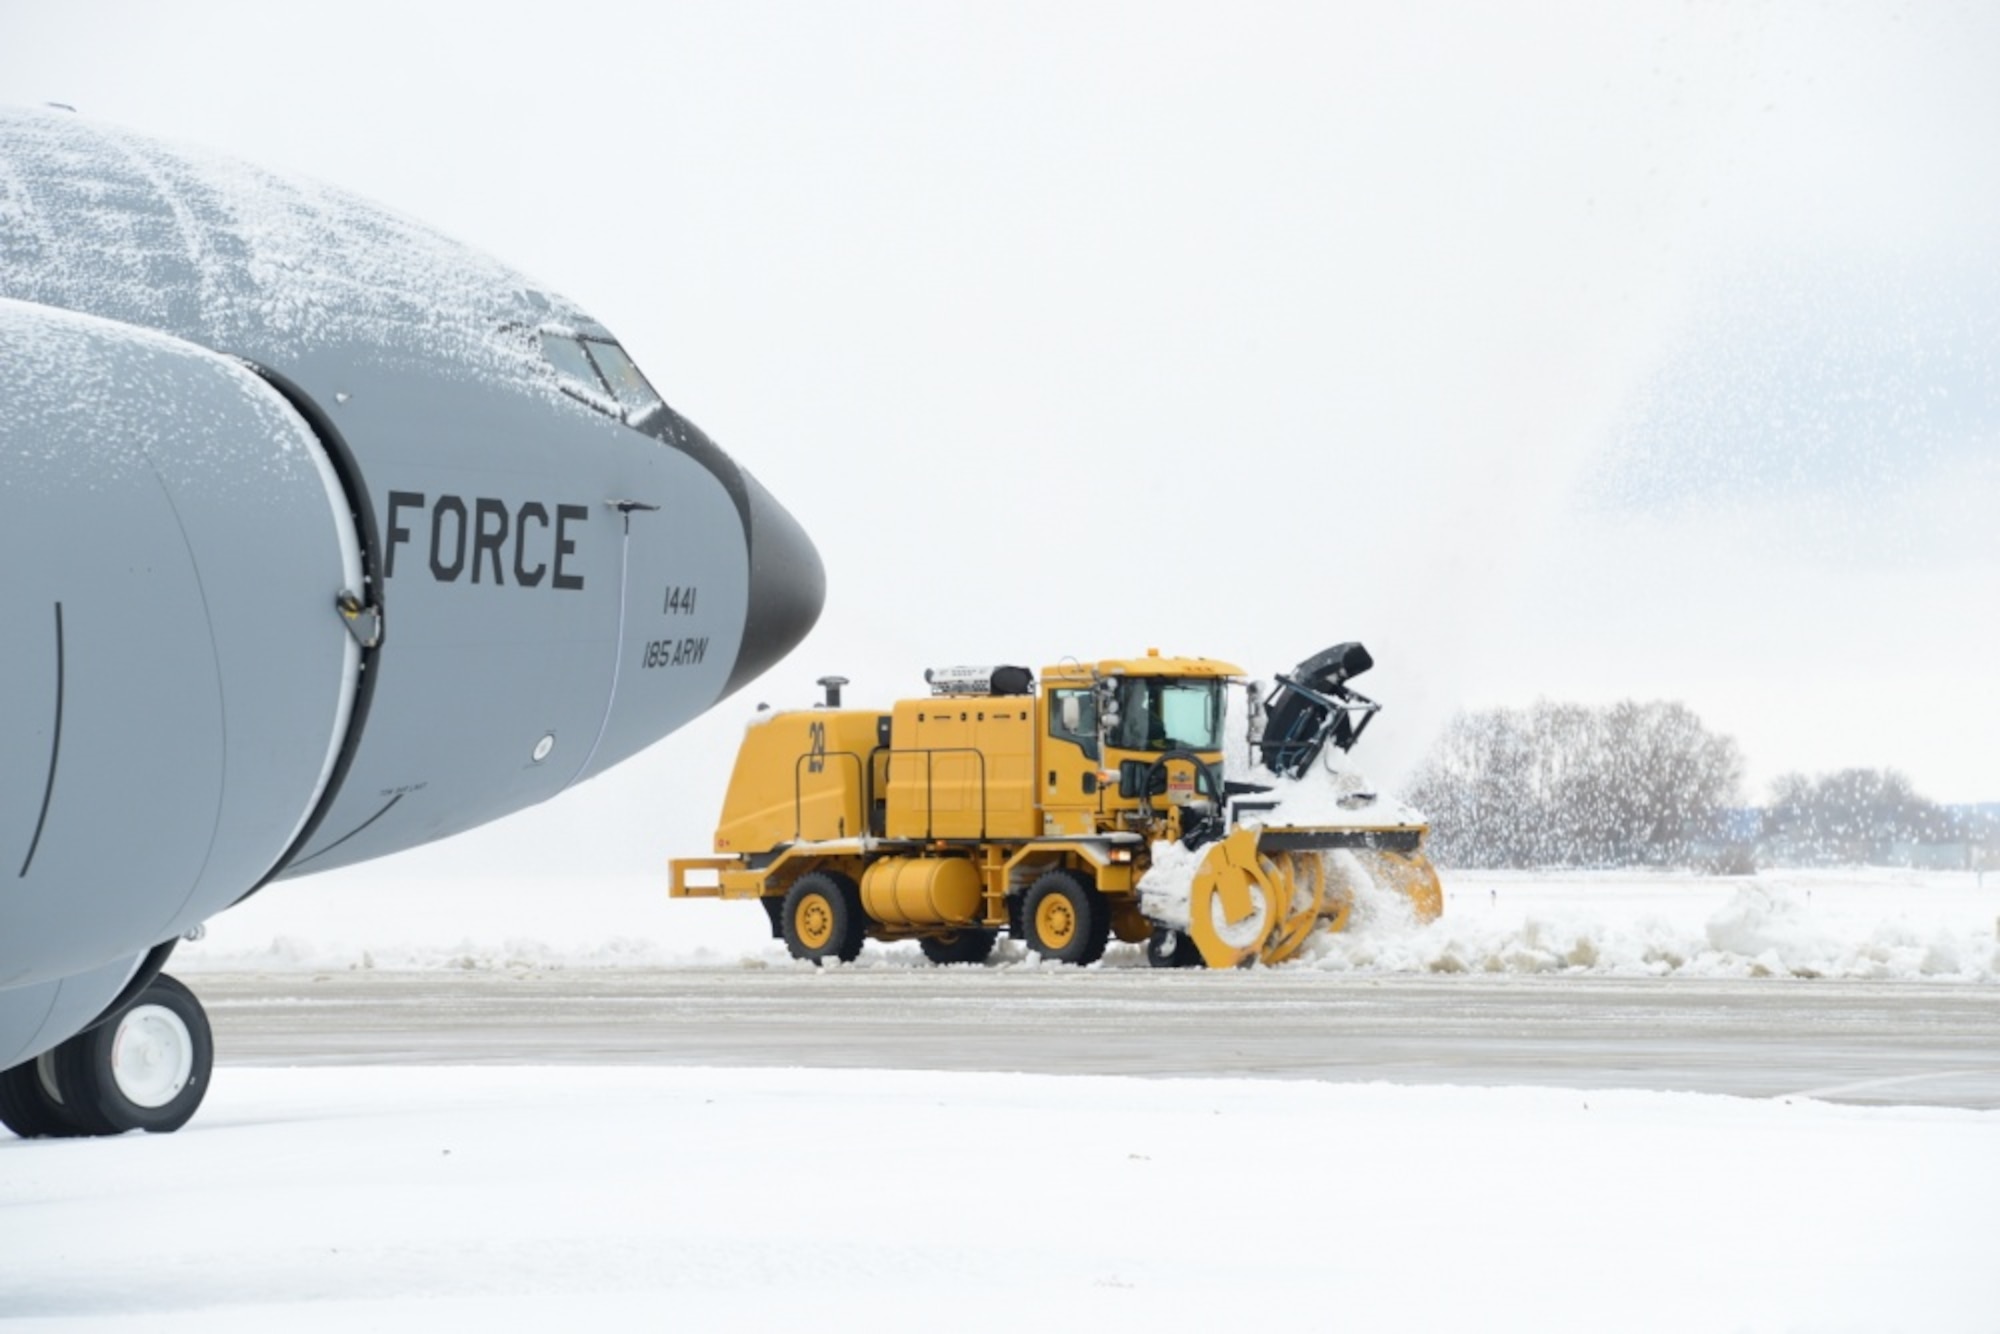 A member of the snow removal team assigned to the 185th Air Refueling Wing, Iowa Air National Guard, clears snow on the ramp in Sioux City, Iowa, Nov. 27, 2019. (Photo by Senior Master Sgt. Vincent De Groot)